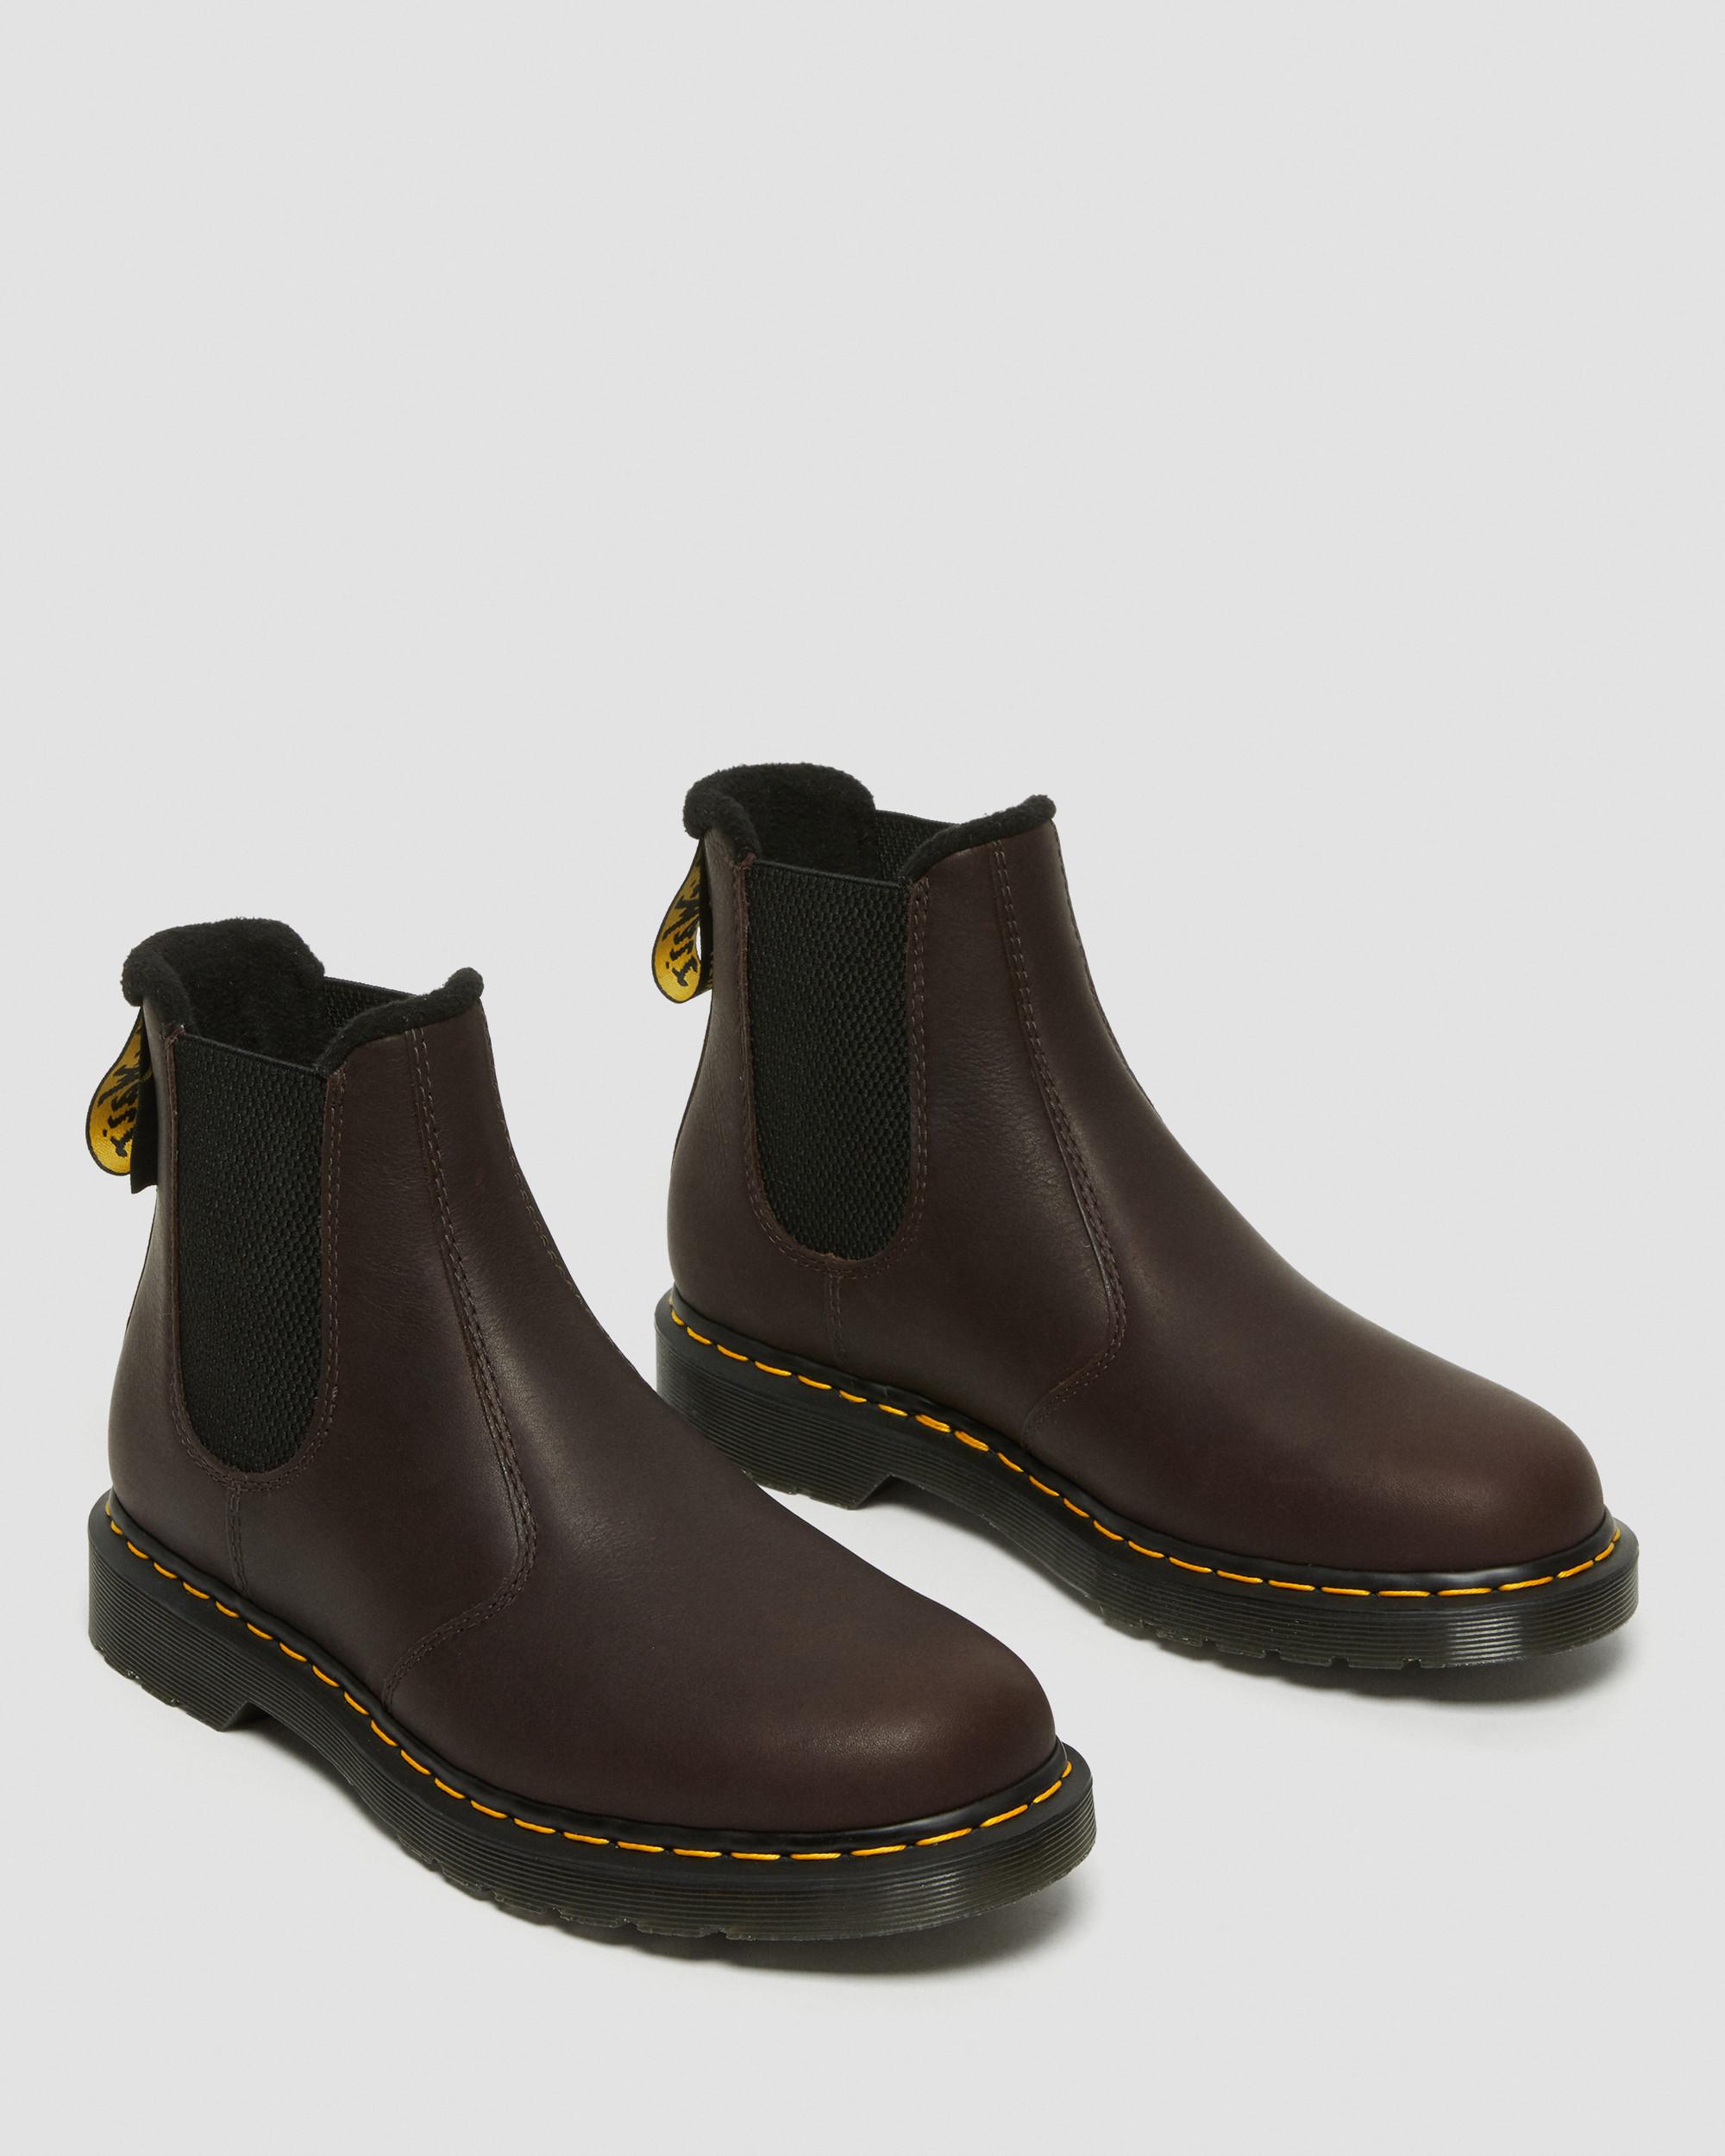 2976 Warmwair Valor Wp Leather Chelsea Boots in Dark Brown